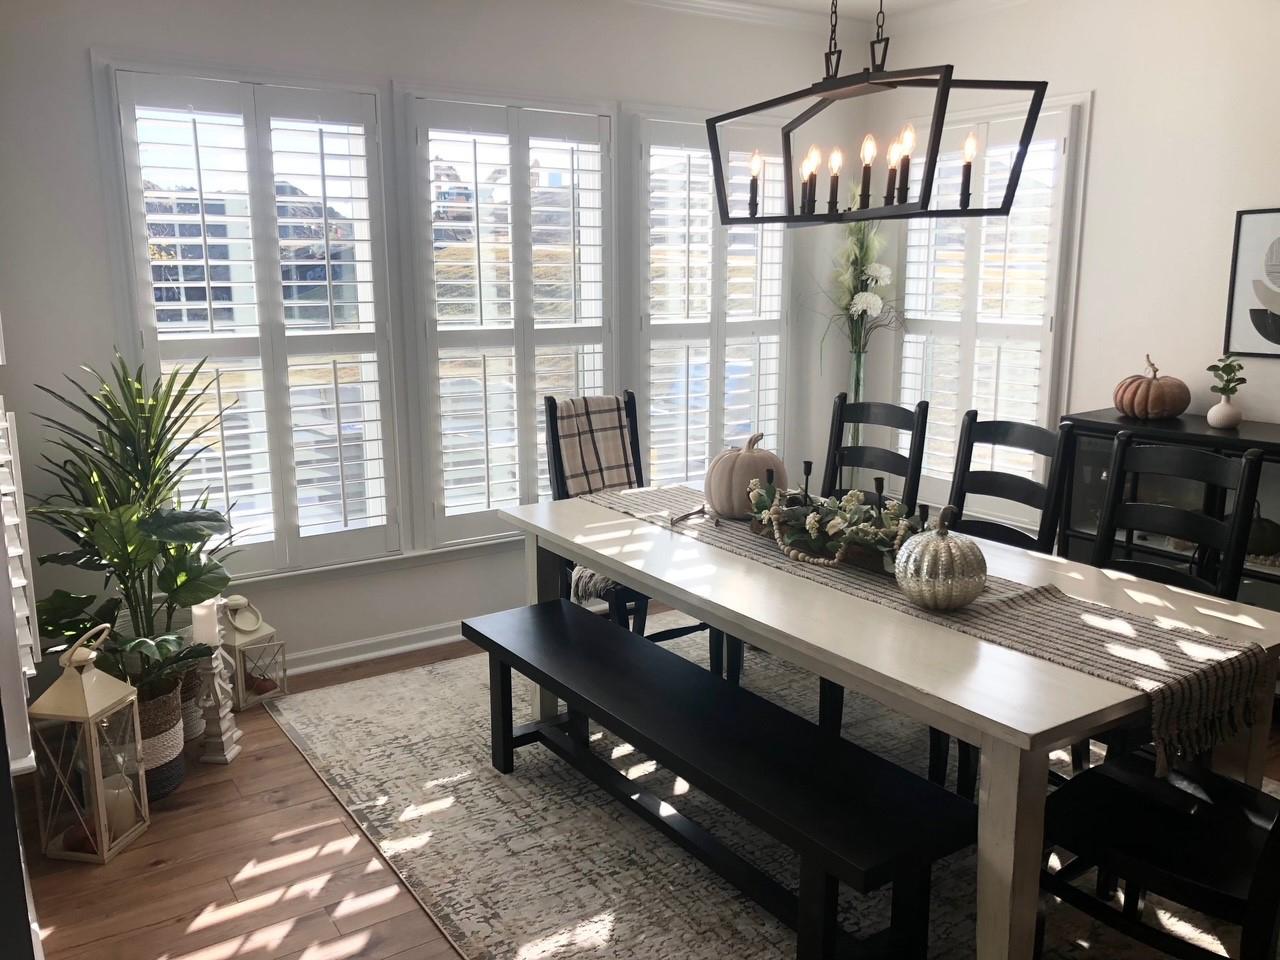 Louverwood shutters in a dining room